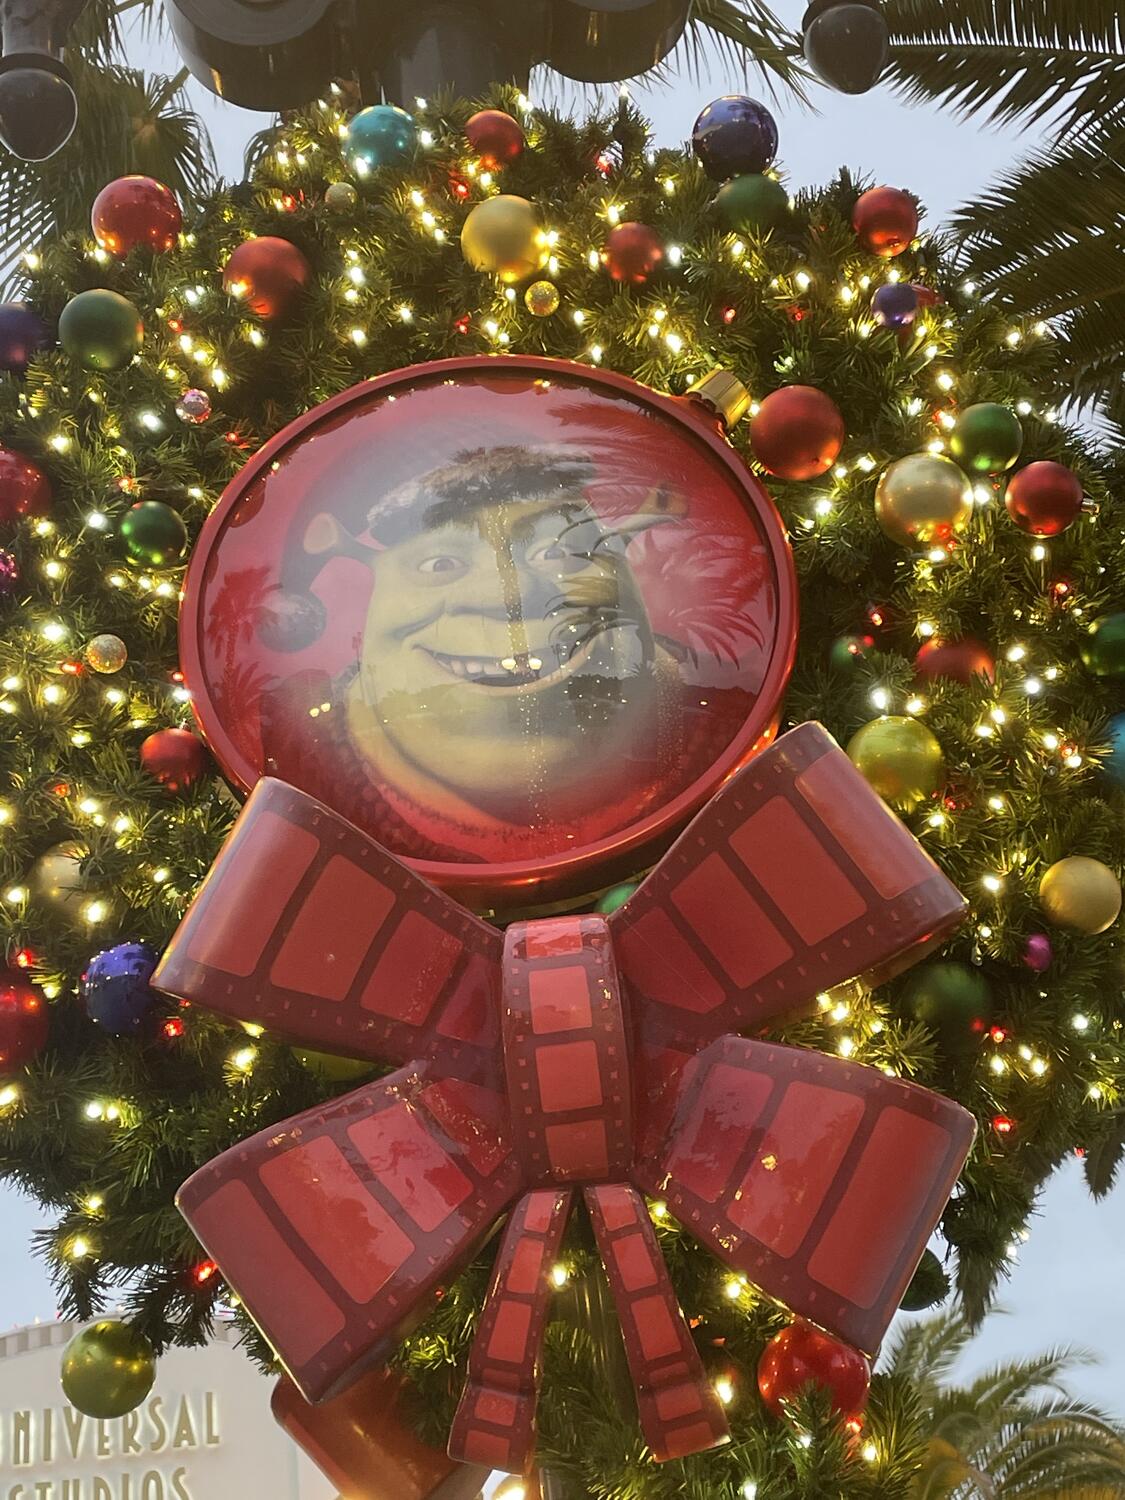 A Christmas wreath on a lamp post. In the center is a big ornament with Shrek's face inside.